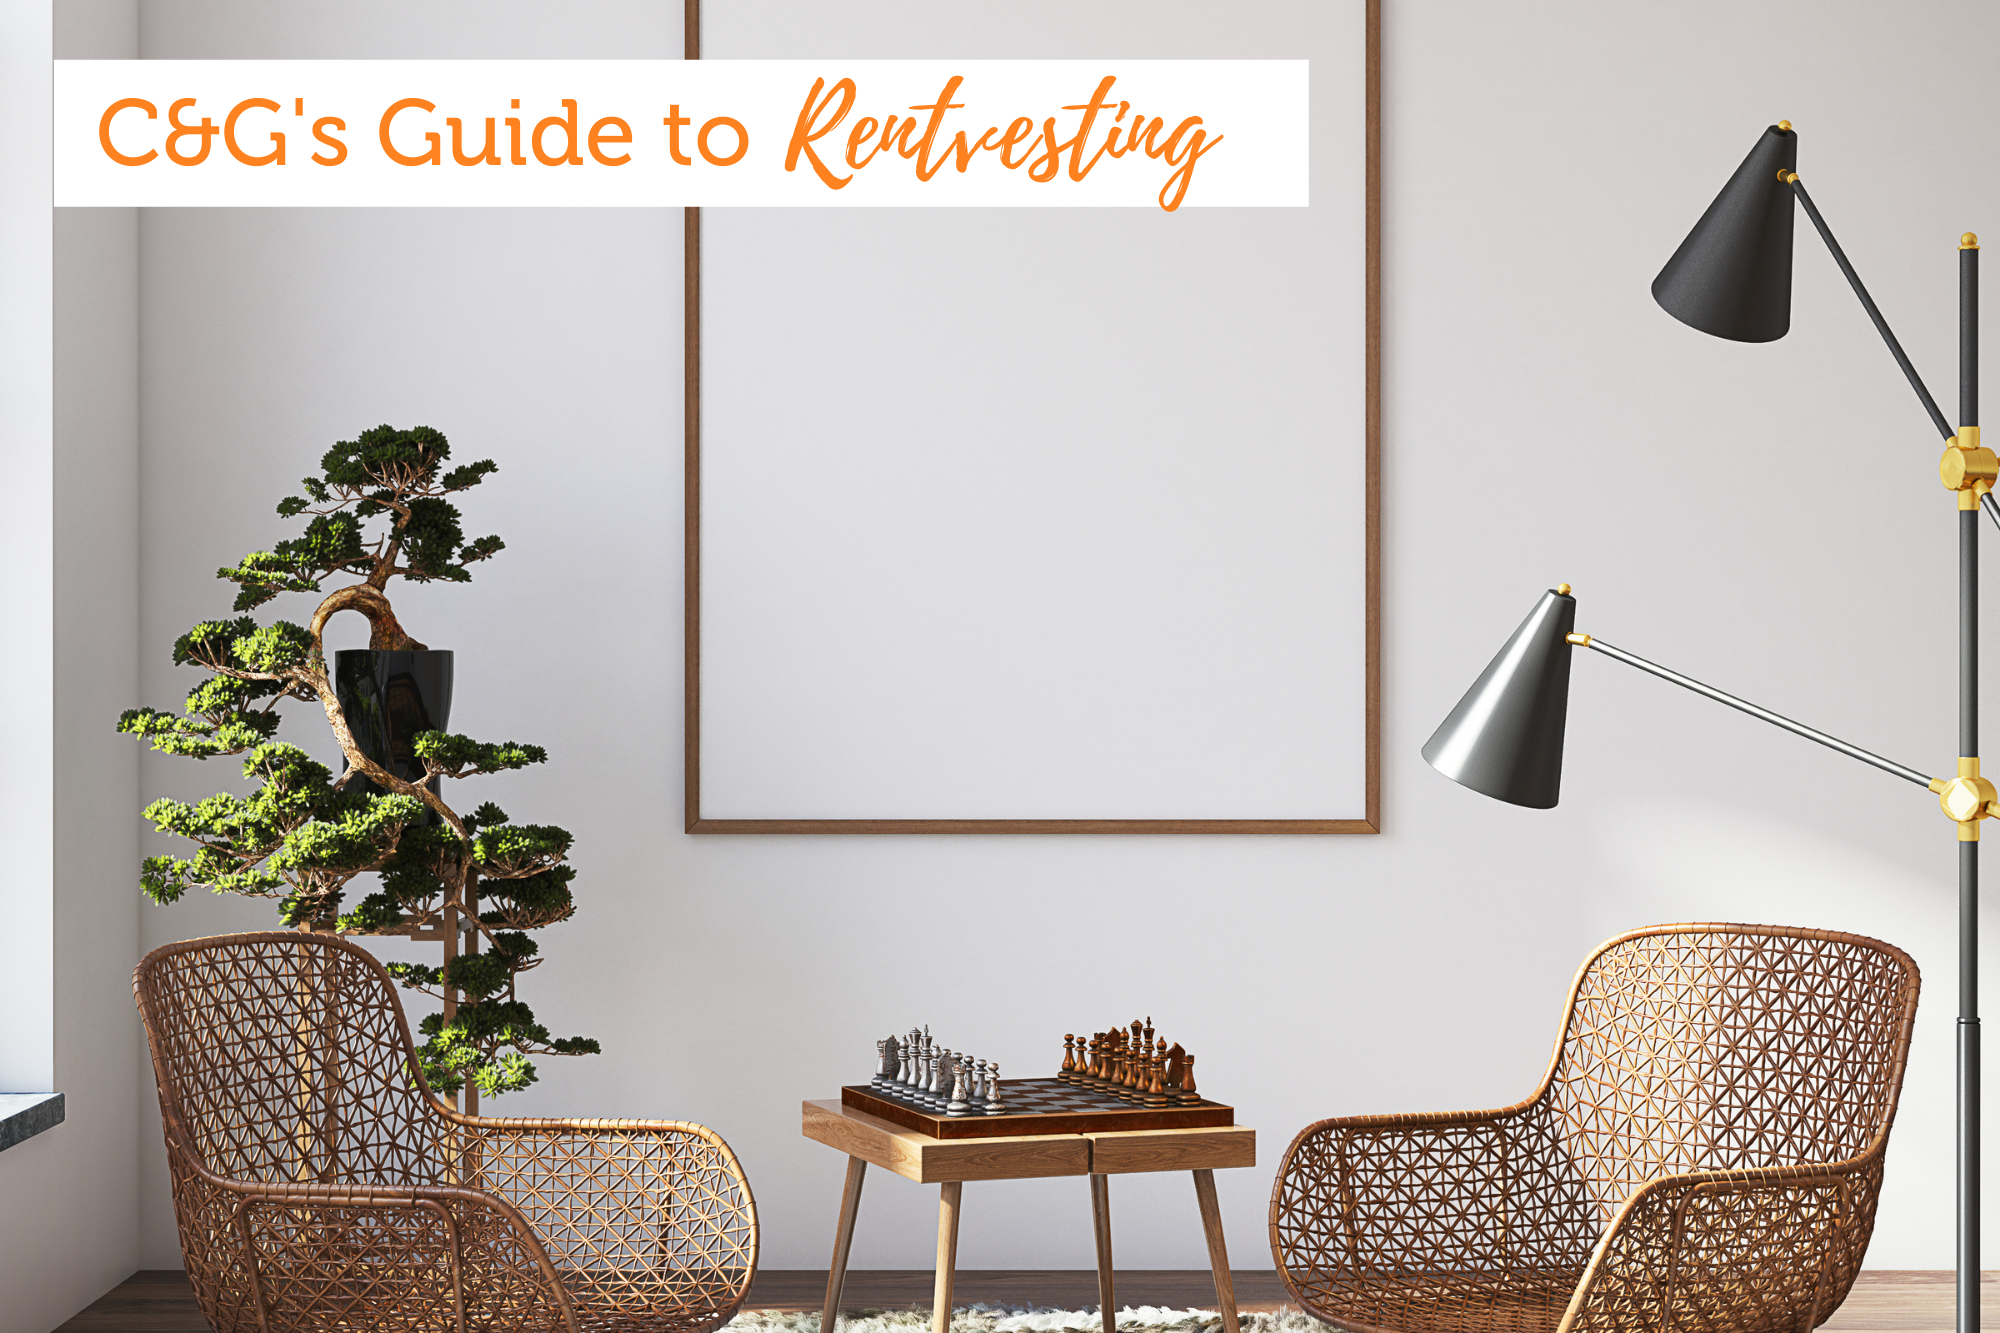 C&G’s Guide to Rentvesting